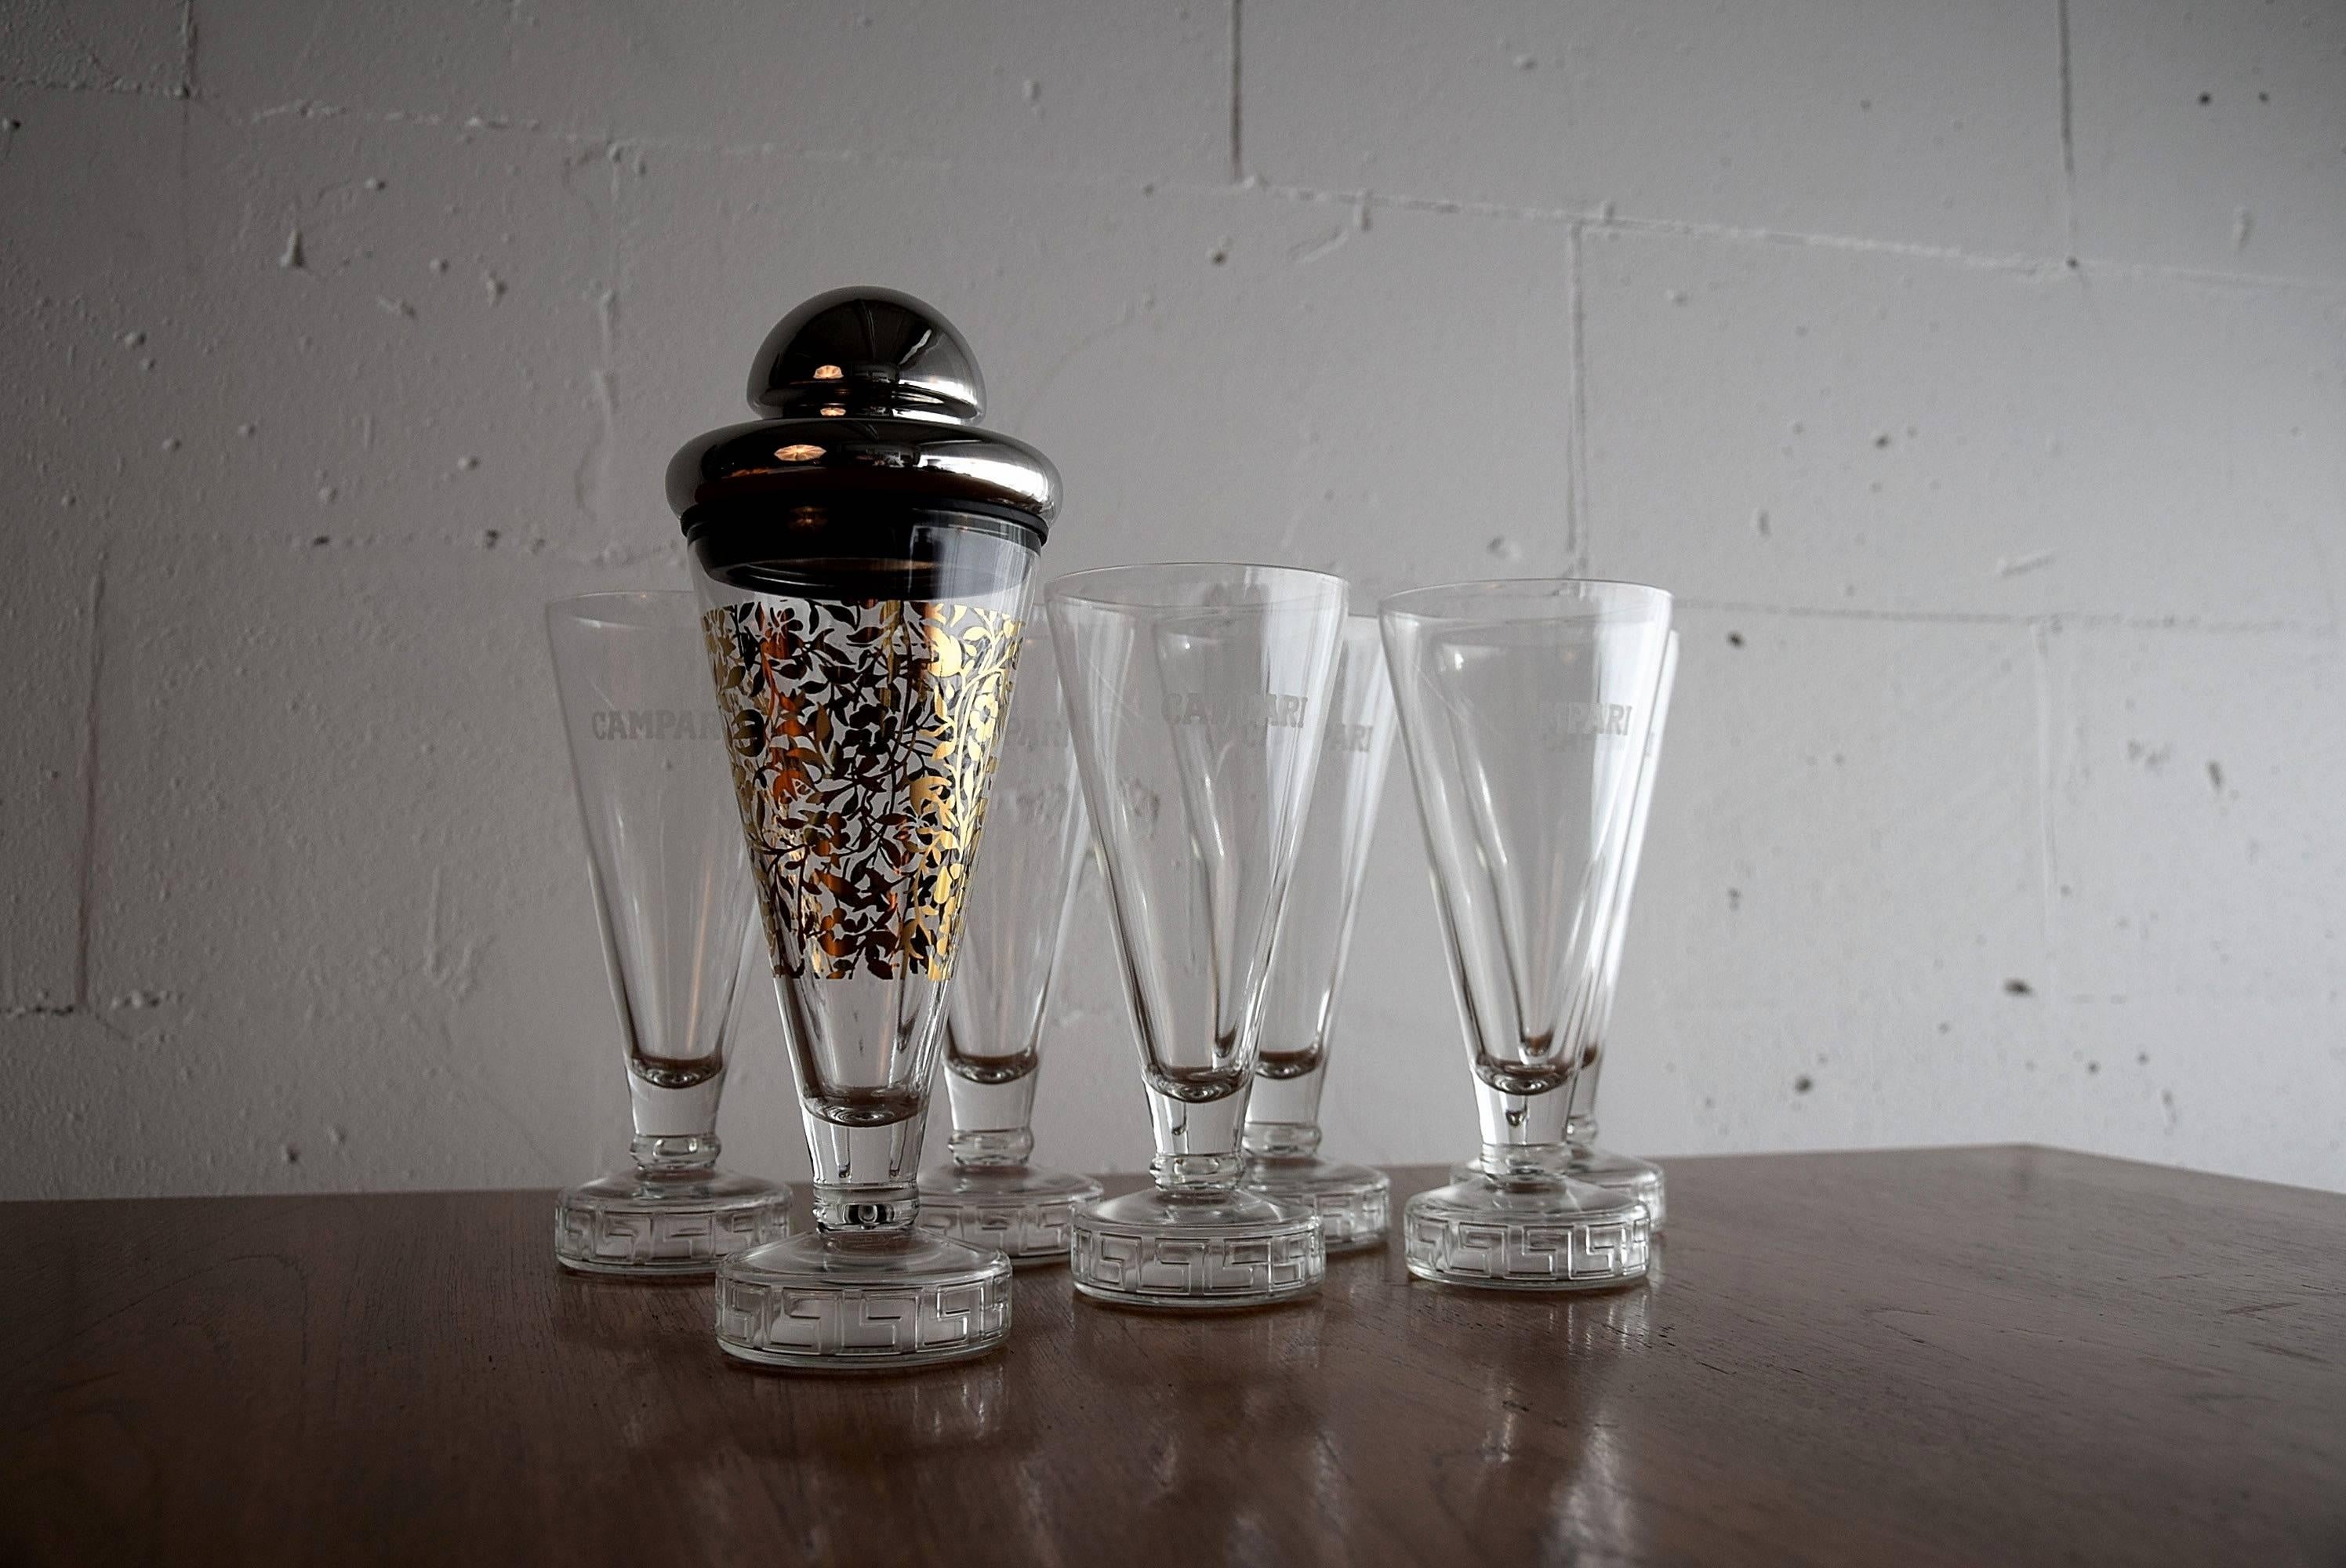 Italian Limited Edition 1986 Cocktail Shaker with Six Glasses by Matteo Thun